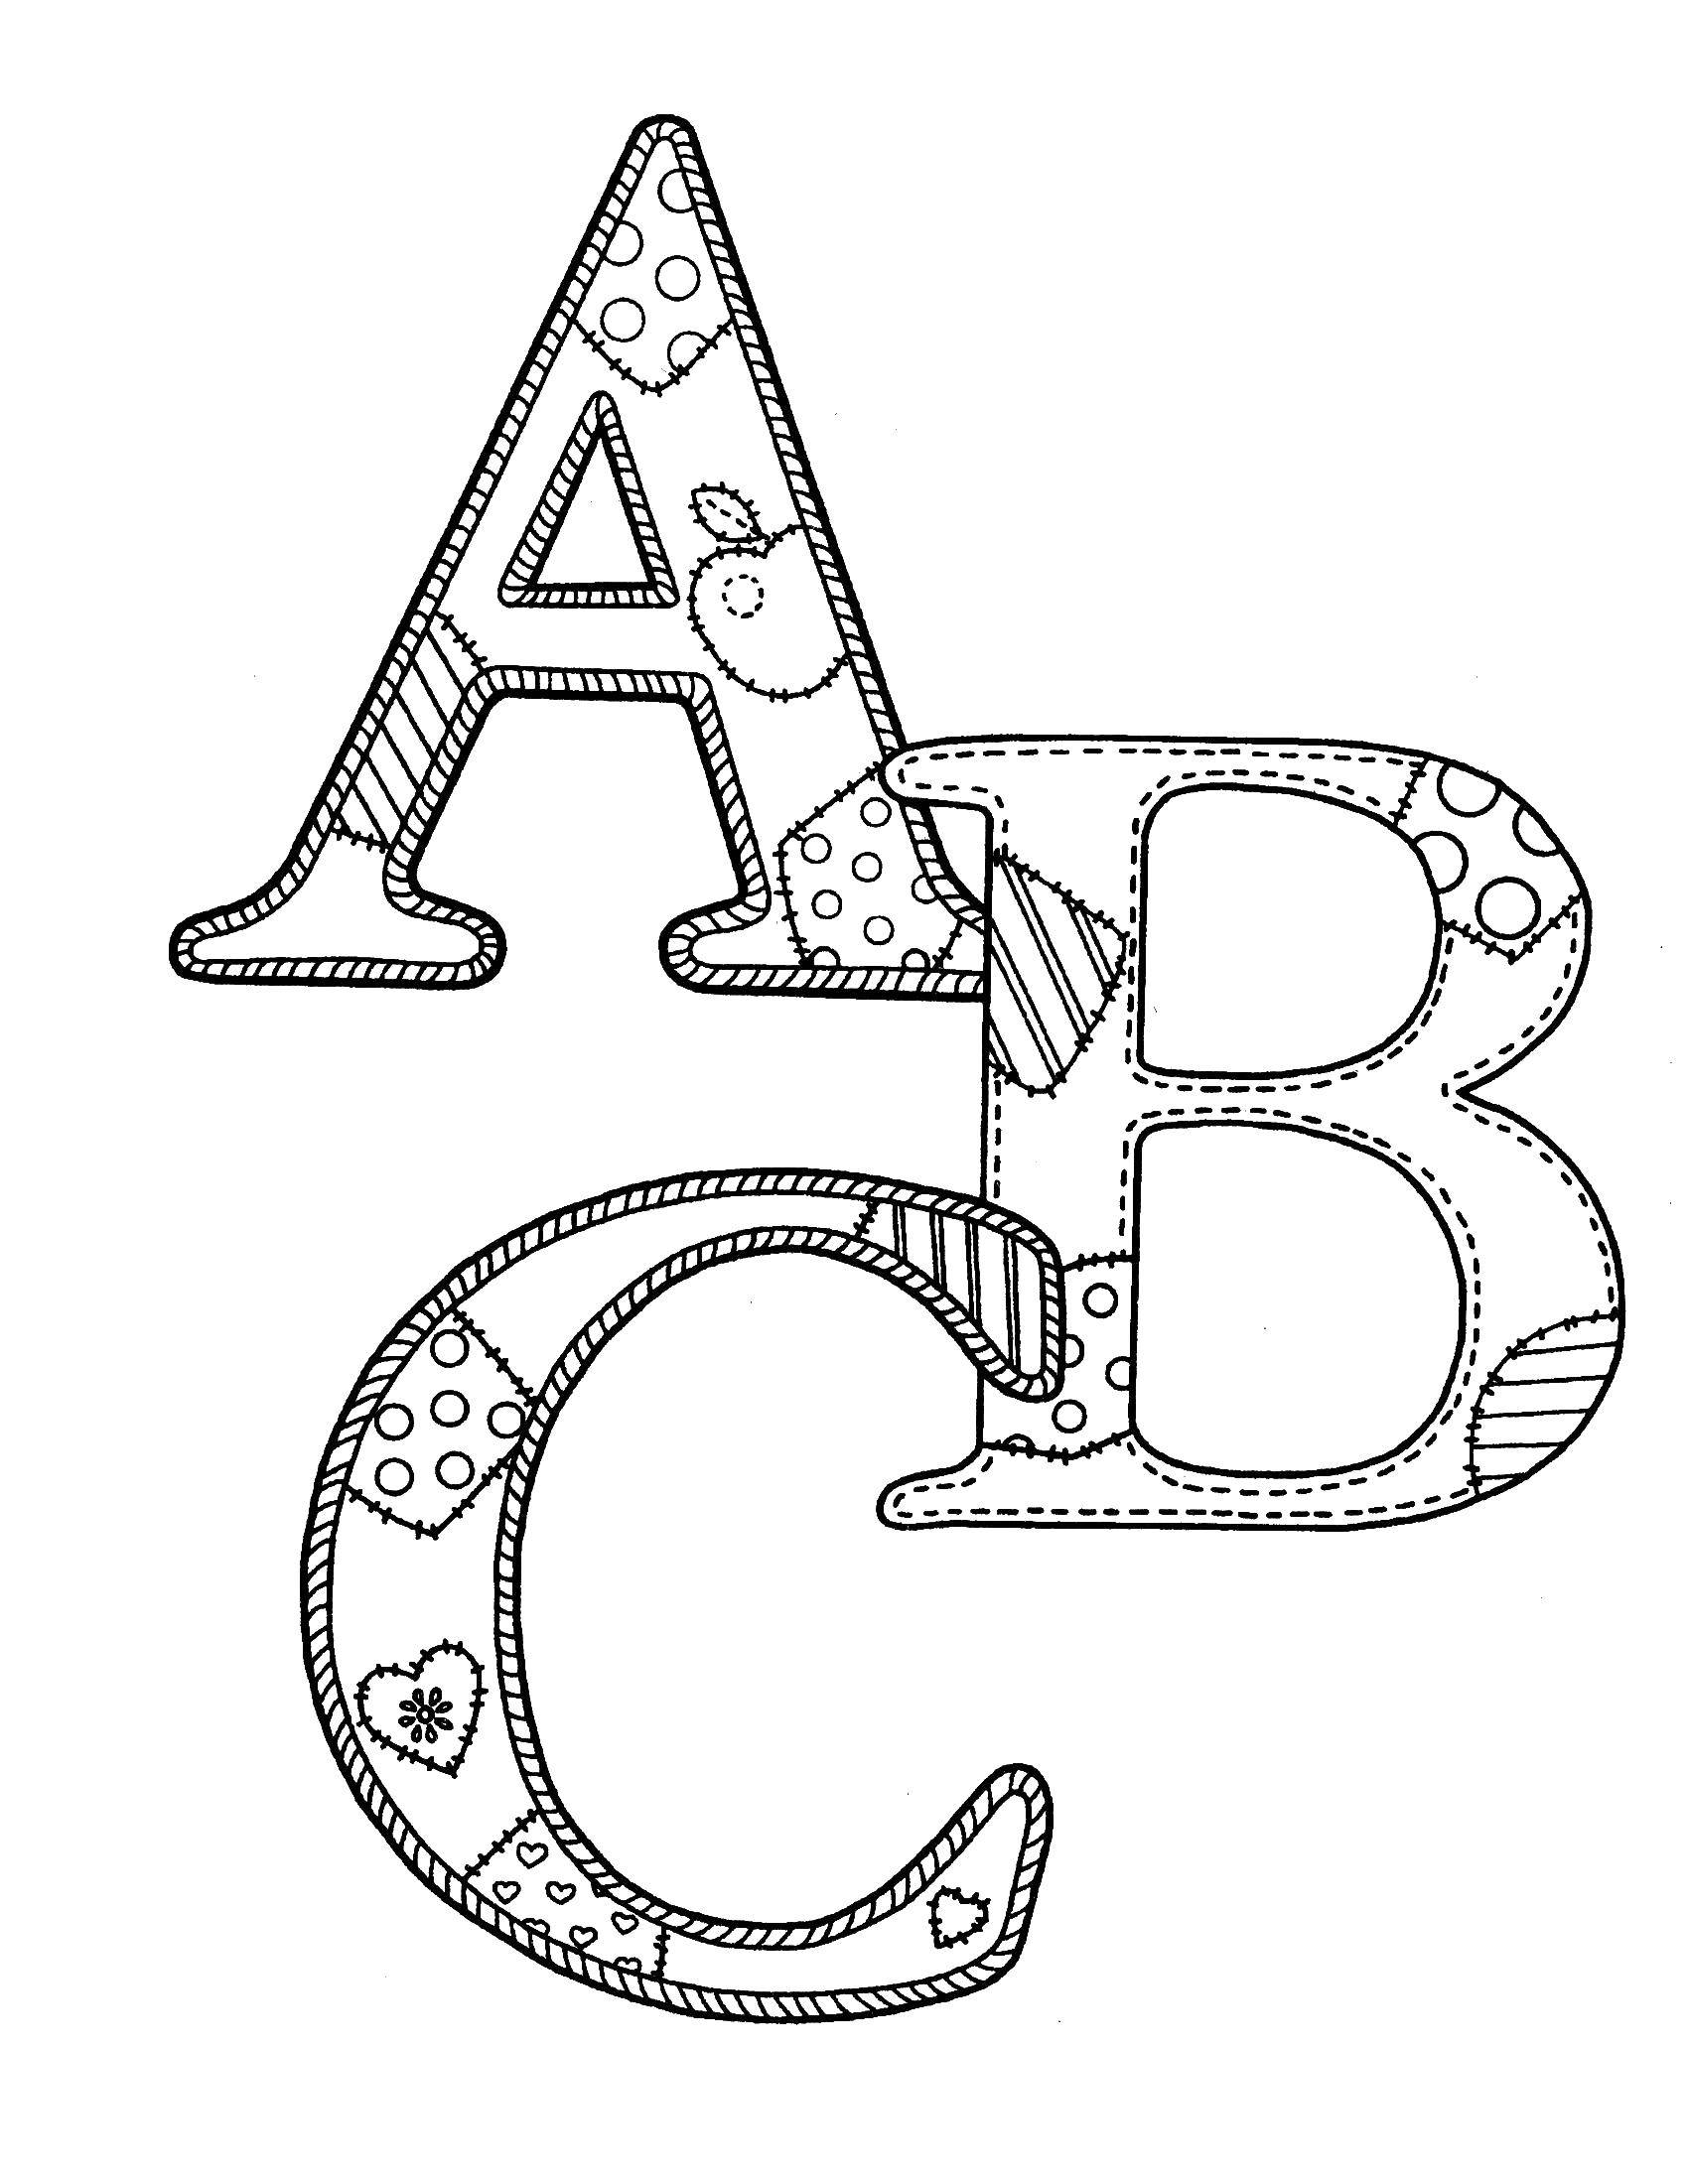 Coloring Abc. Category English. Tags:  A , B, C, LETTERS.